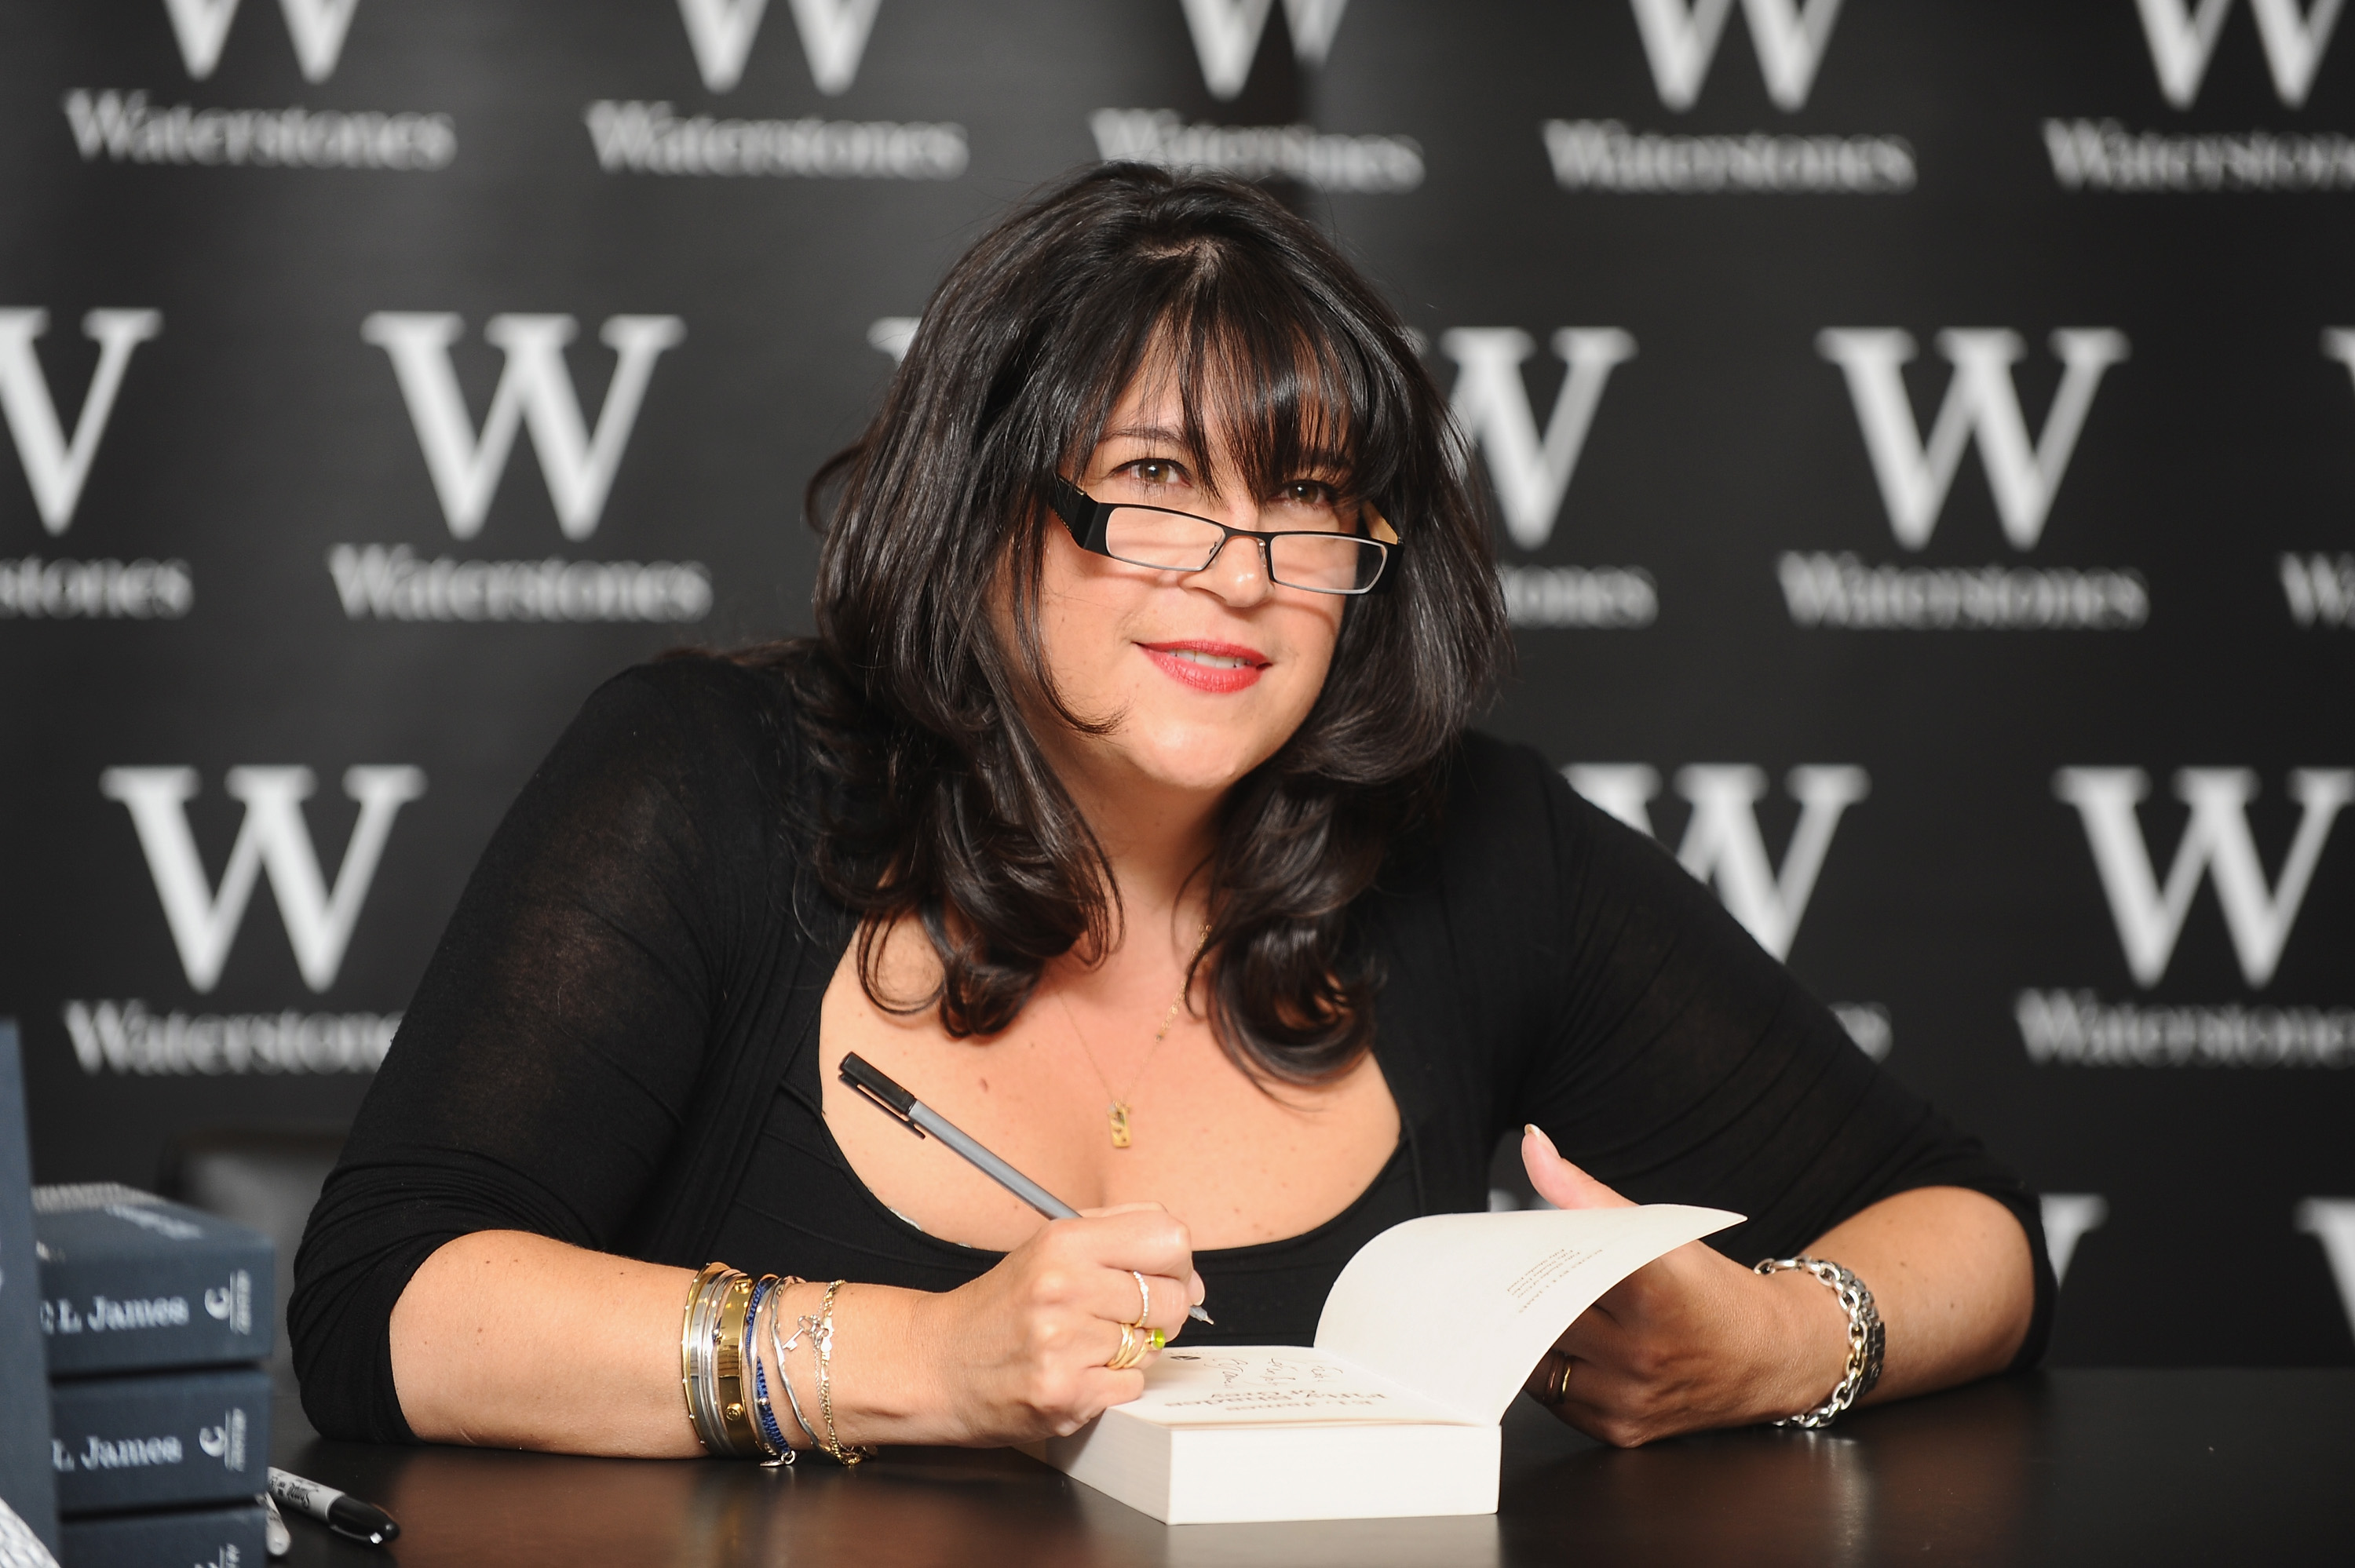 E L James  meets her fans and signs copies of her bestselling novels at Waterstones, Piccadilly on September 6, 2012 in London, England. (Ferdaus Shamim—Getty Images)